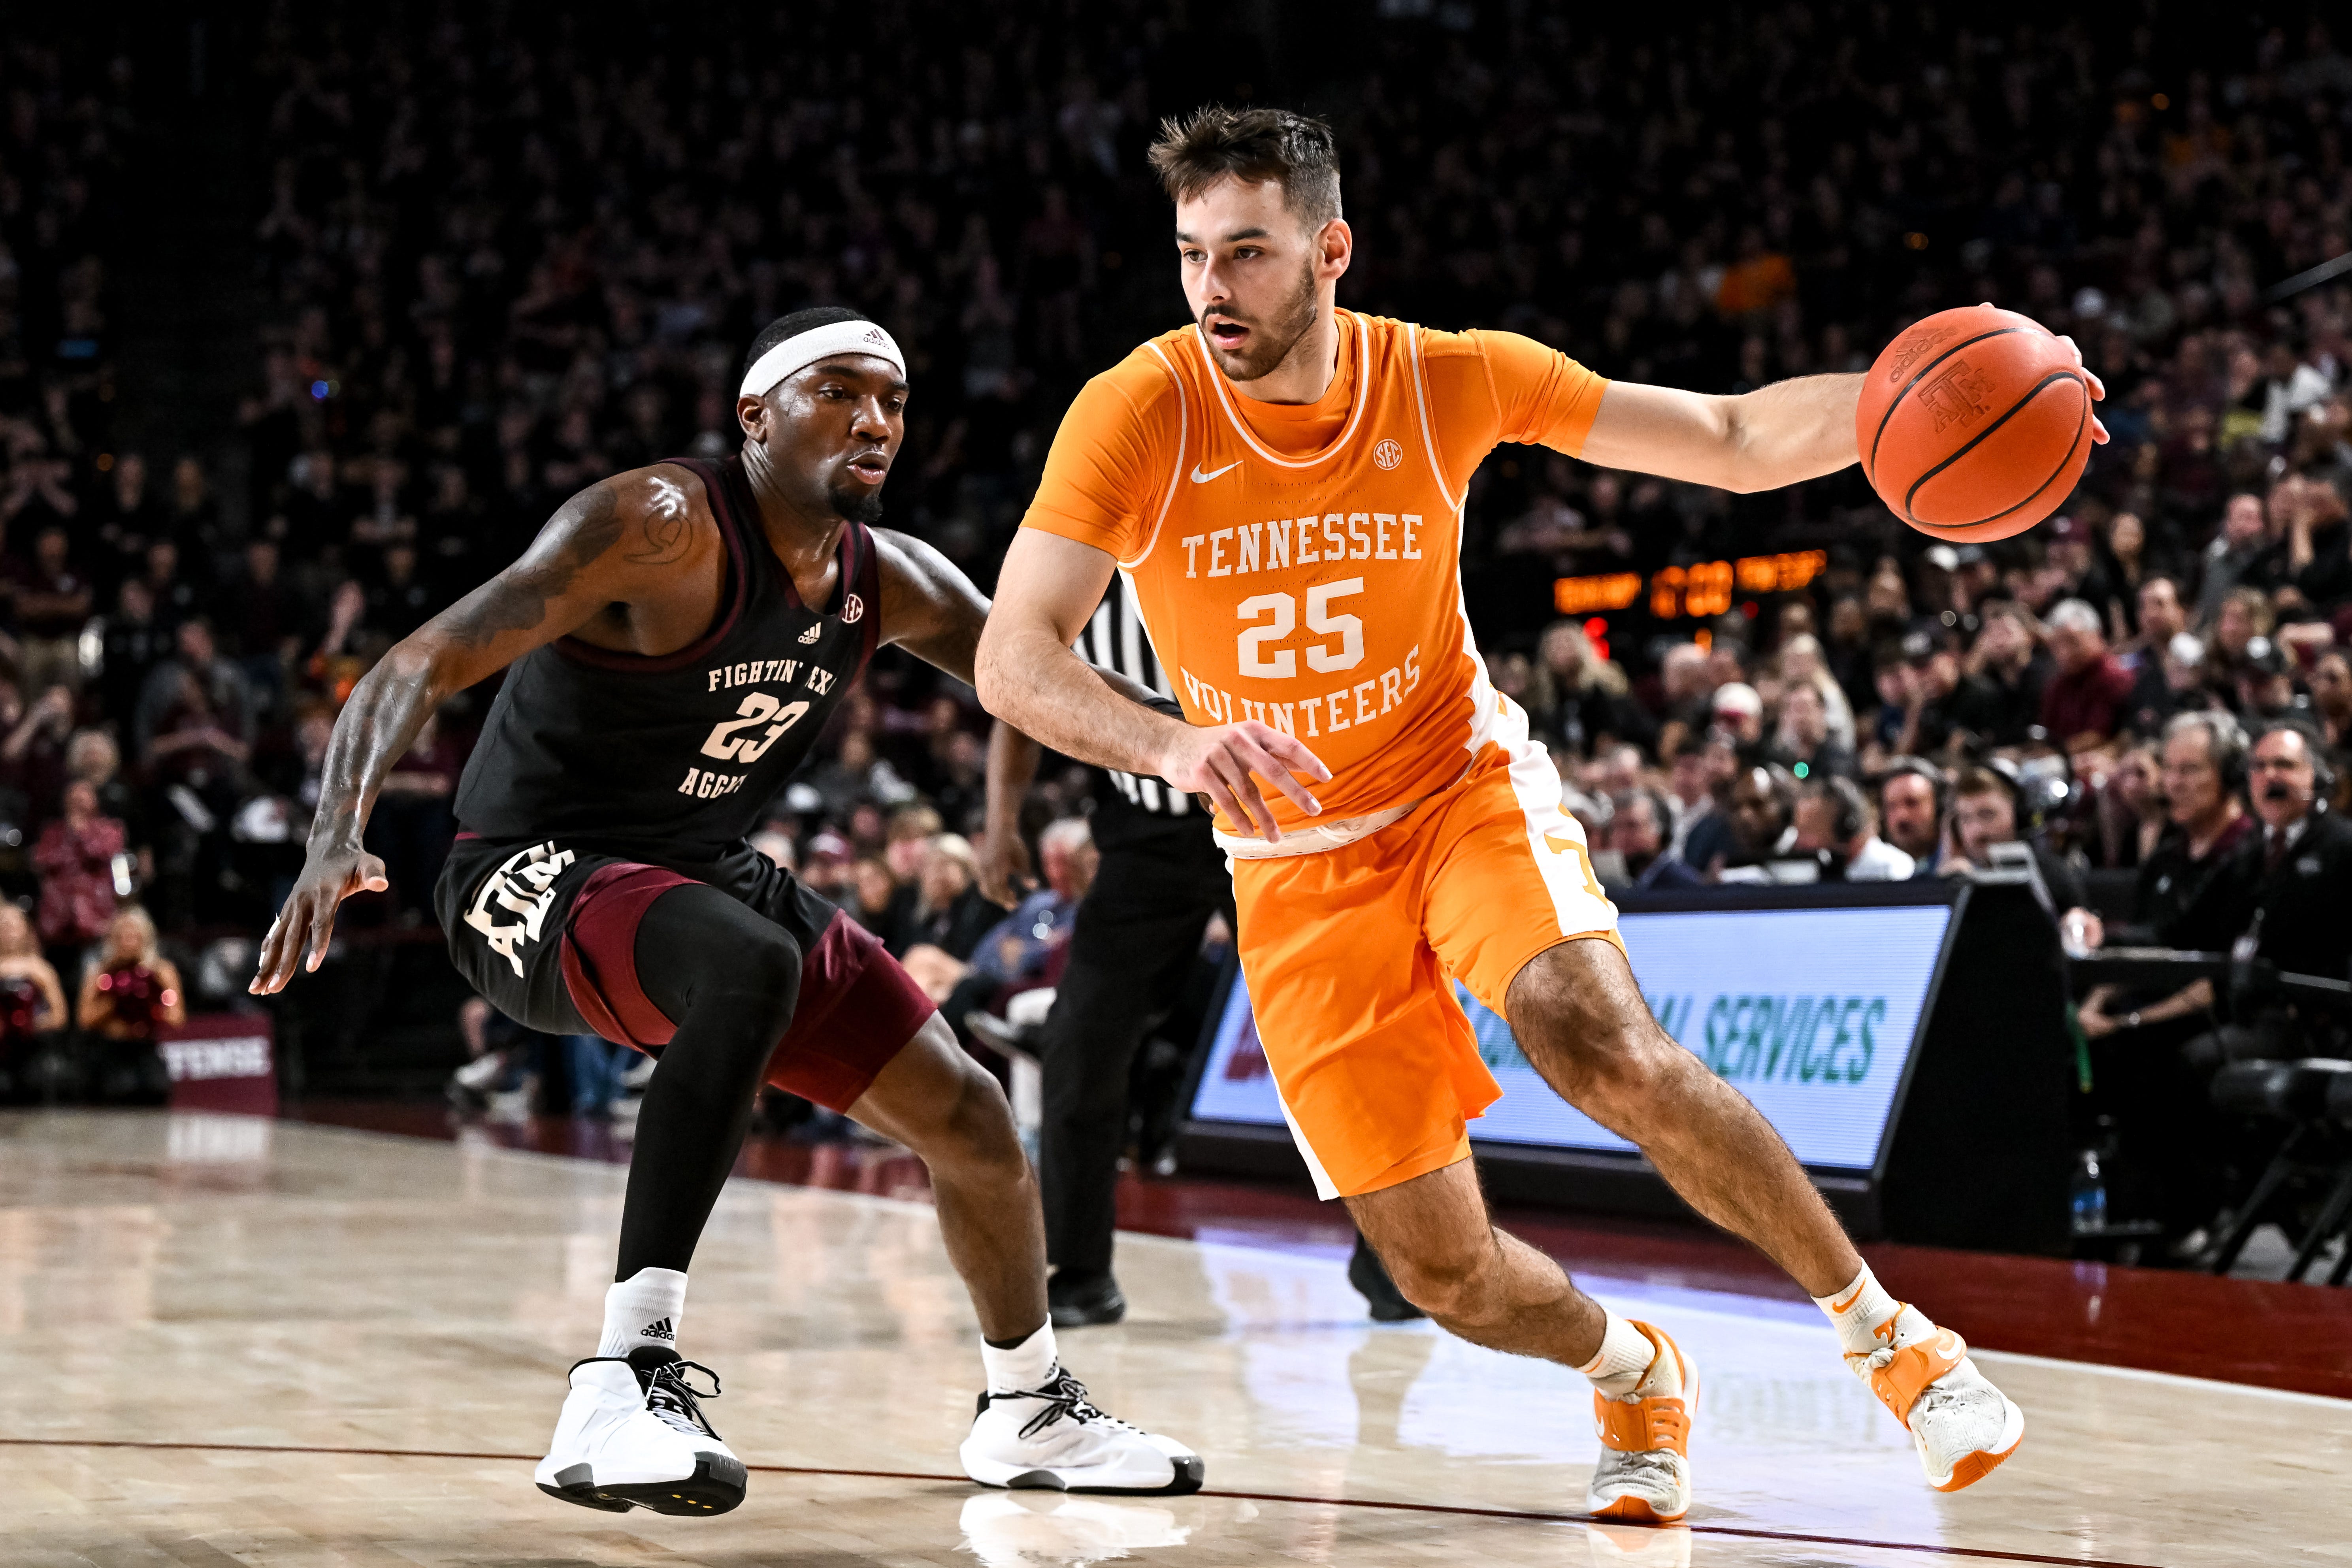 Tennessee basketball falls at Texas A&M, drops fourth straight road game